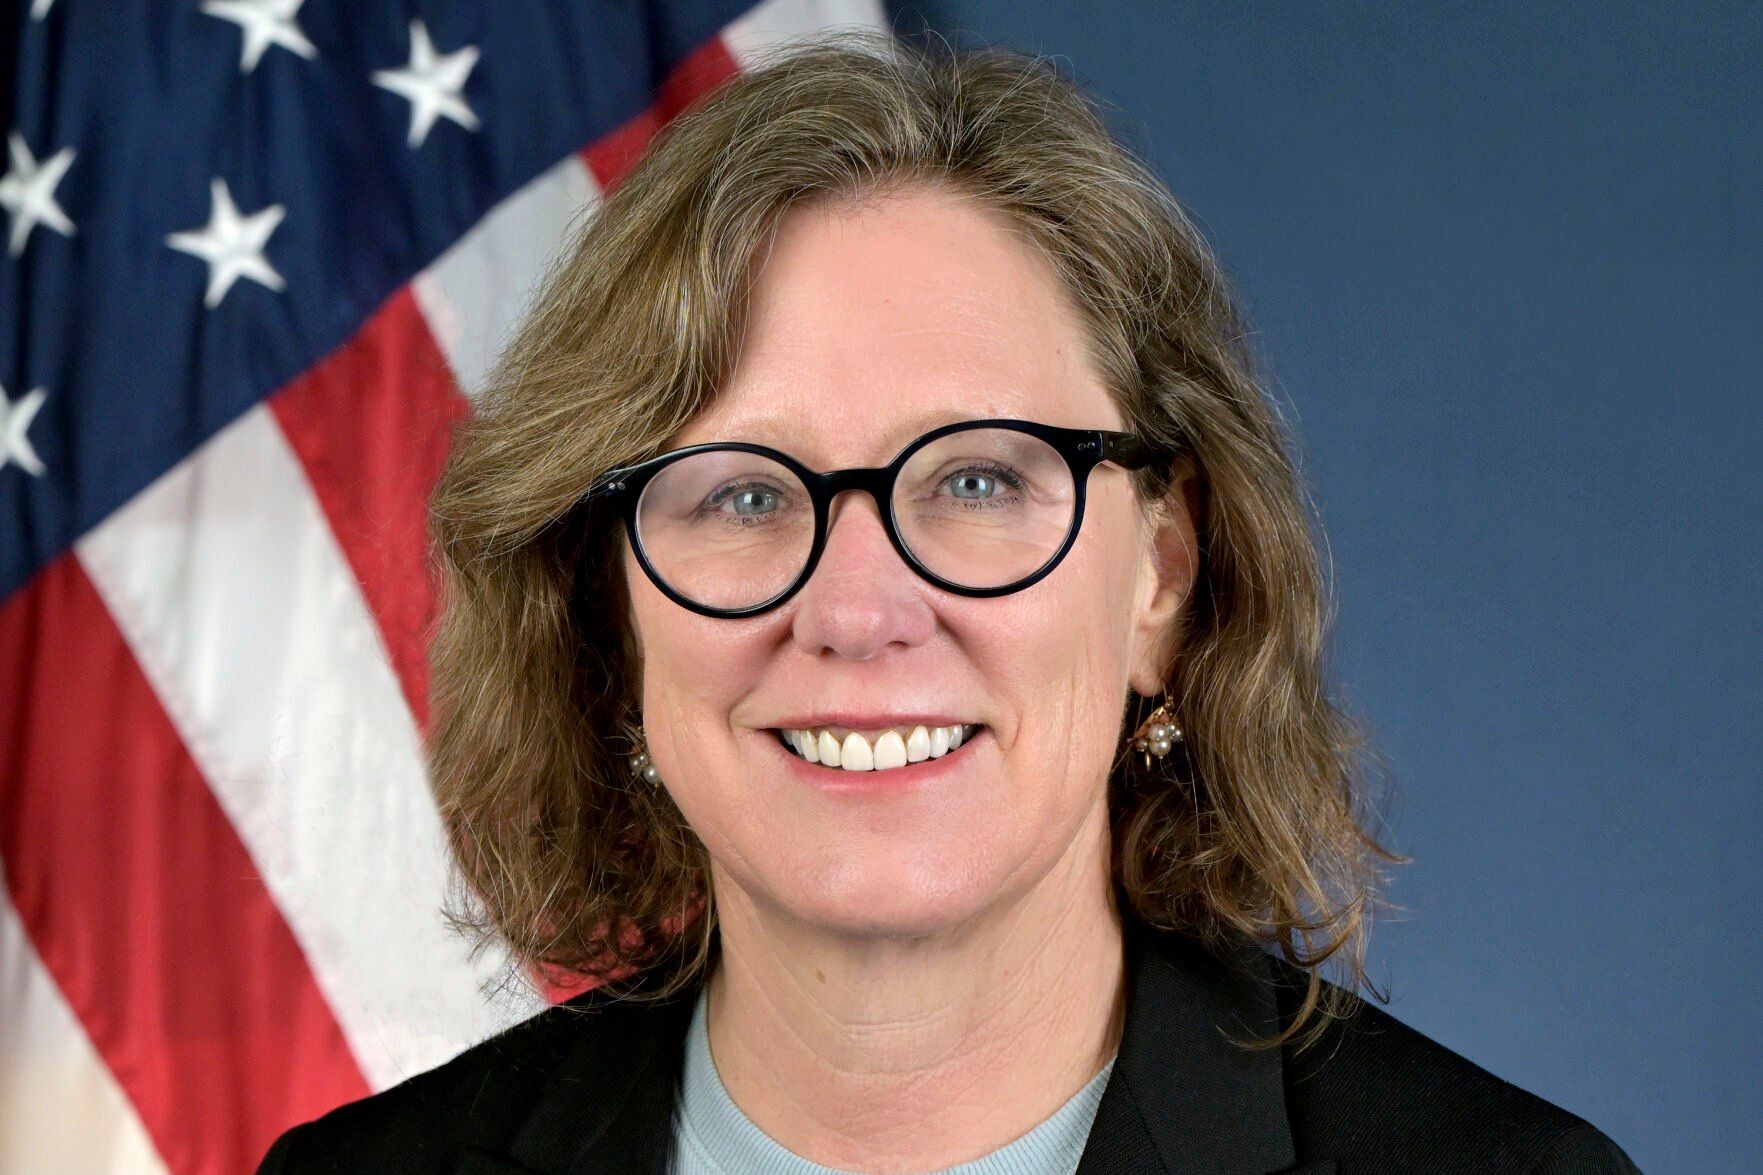 <p>Ann Carlson, shown in an undated photo, has served as acting administrator of the National Highway Traffic Safety Administration, where she started as chief counsel in 2021. Carlson is leaving the agency on Wednesday to resume teaching at the UCLA School of Law.(NHTSA via AP)</p>   PHOTO CREDIT: NHTSA via AP